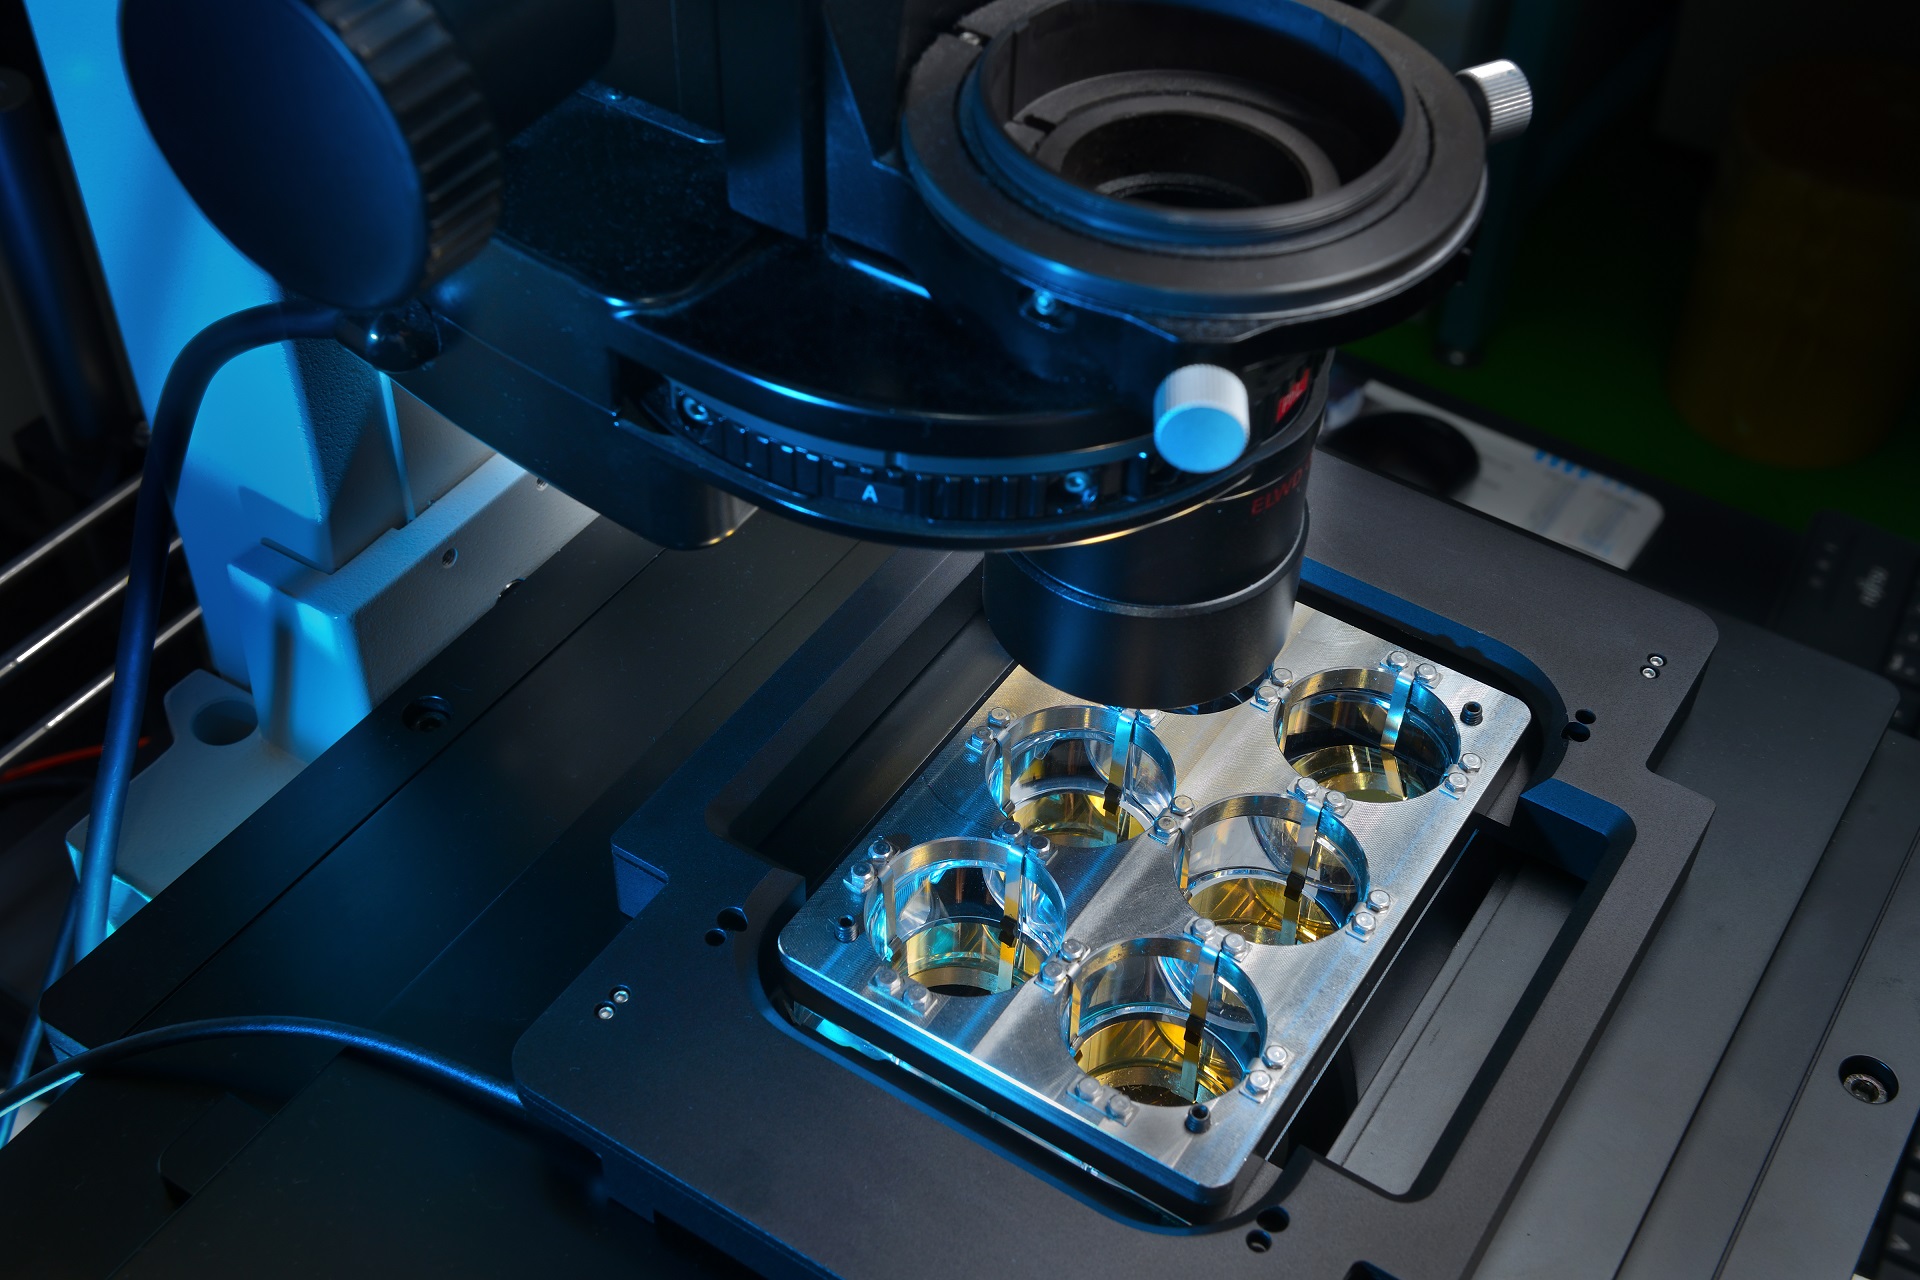 The MIR LIFT process transfers living cells to microtiter plates (MTP) one after the other at a high rate of up to 100 Hz. In order to integrate the highly efficient process into microscopy platforms regardless of the manufacturer, Fraunhofer ILT has developed, among other things, the holder shown here for a six-well MTP.